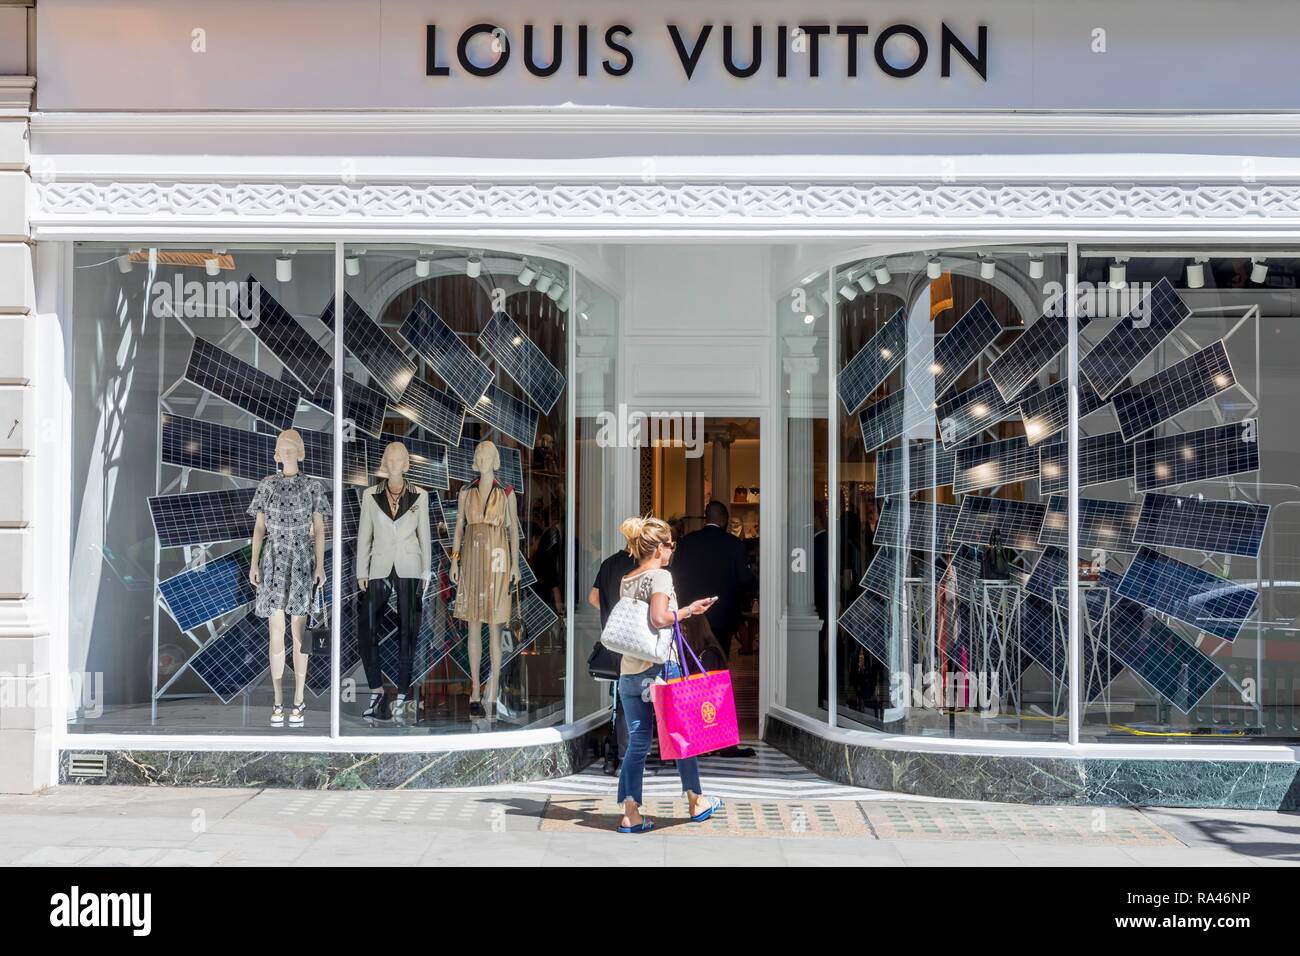 Passers-by in front of the shop window of the fashion store Louis Vuitton, London, United Kingdom Stock Photo